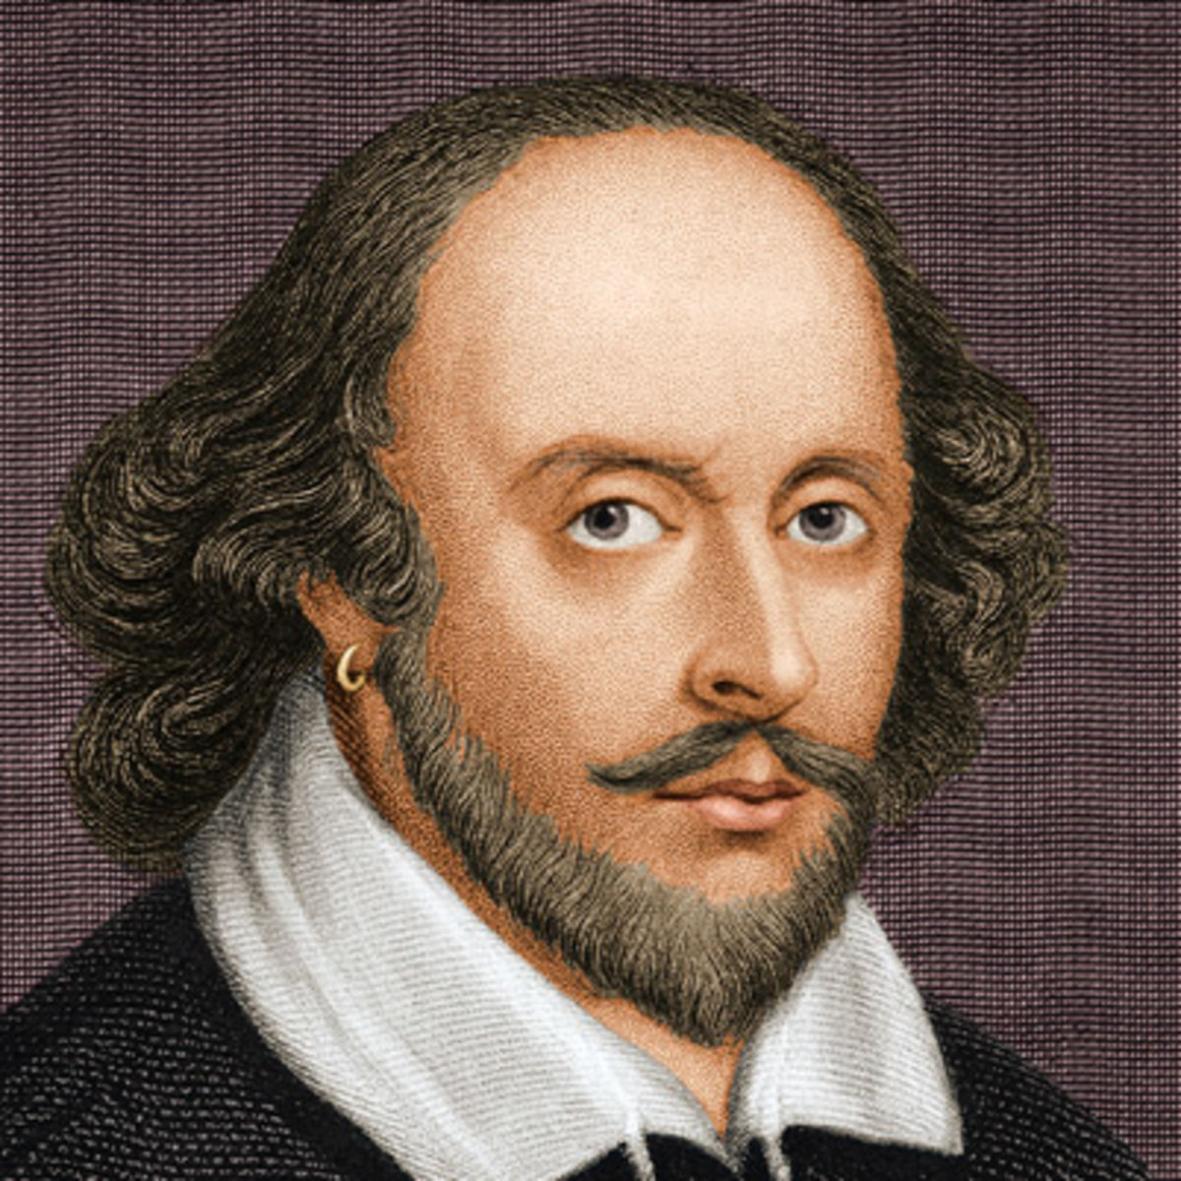 What Were The Major Themes Explored In William Shakespeare's Plays?